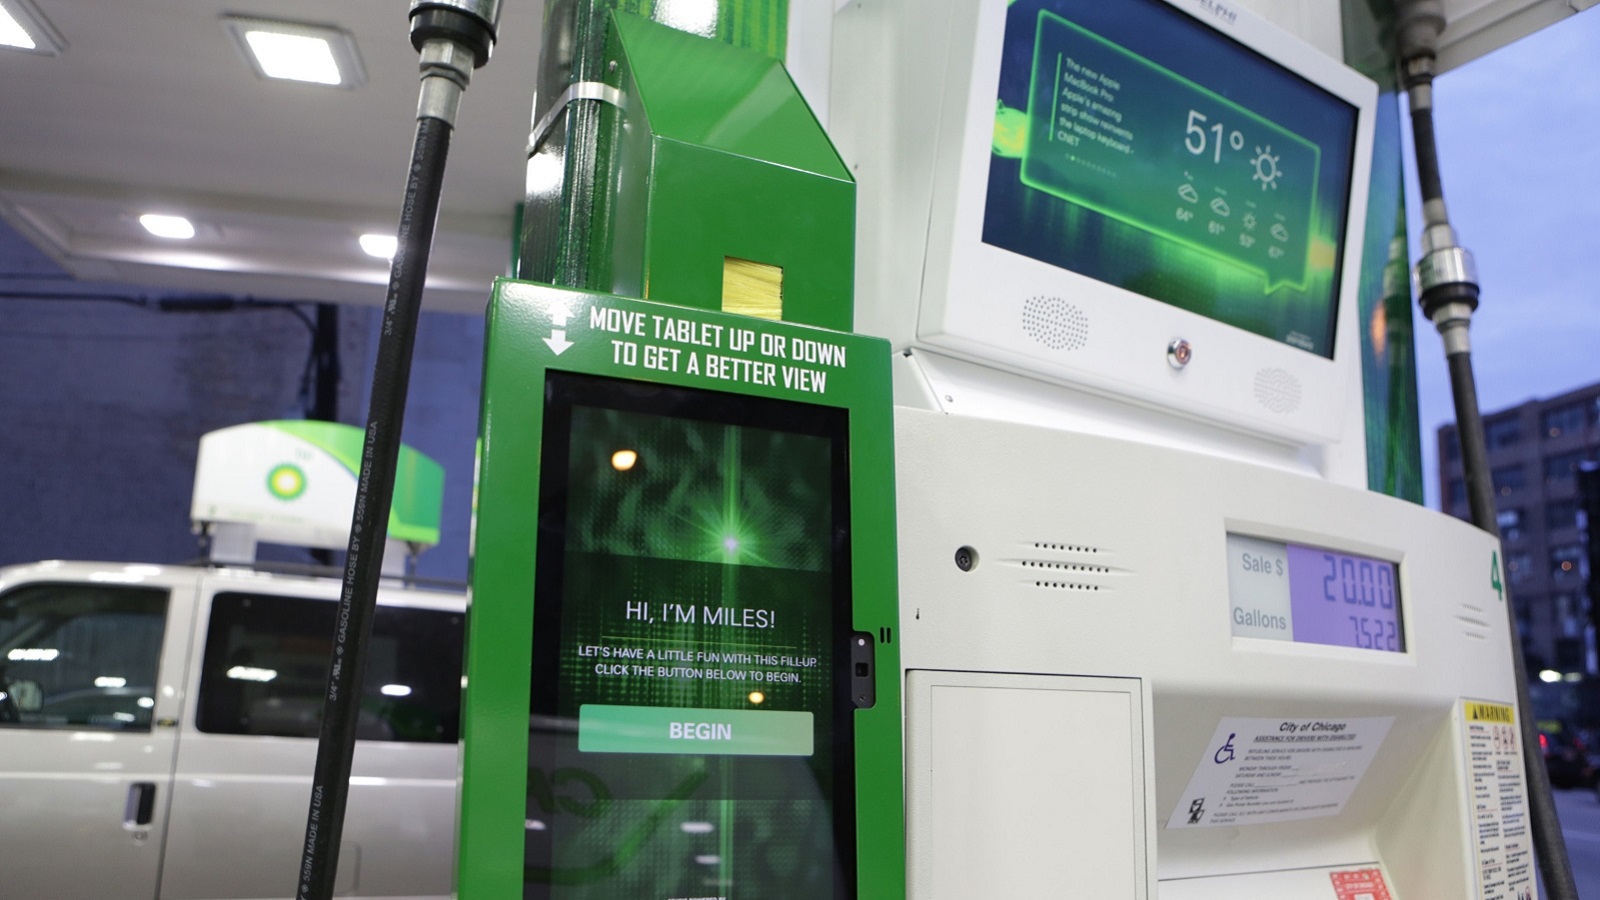 BP’s Miles Is a Chatty and Highly Interactive Fuel Pump